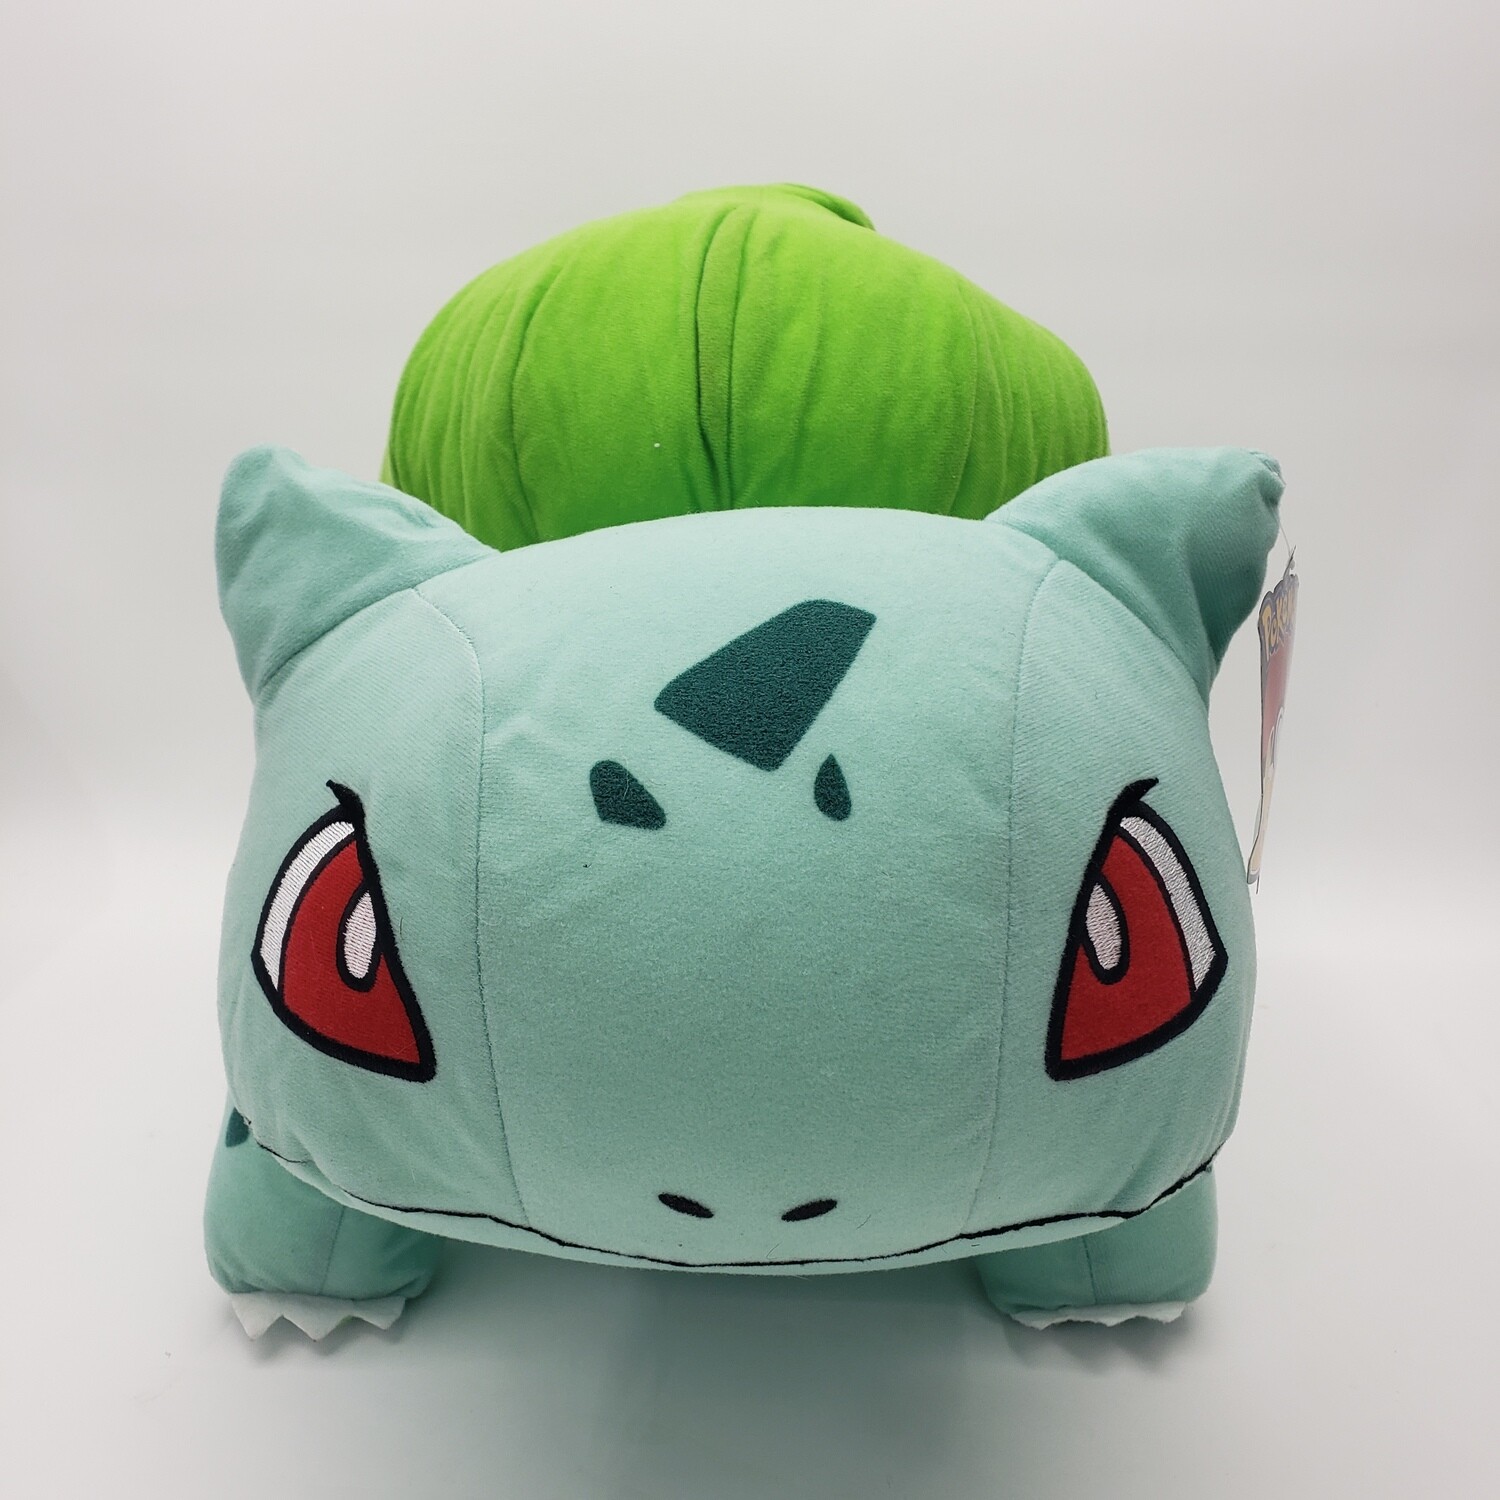 Pokemon 21" Bulbasaur Plush Toy by Toy Factory - New